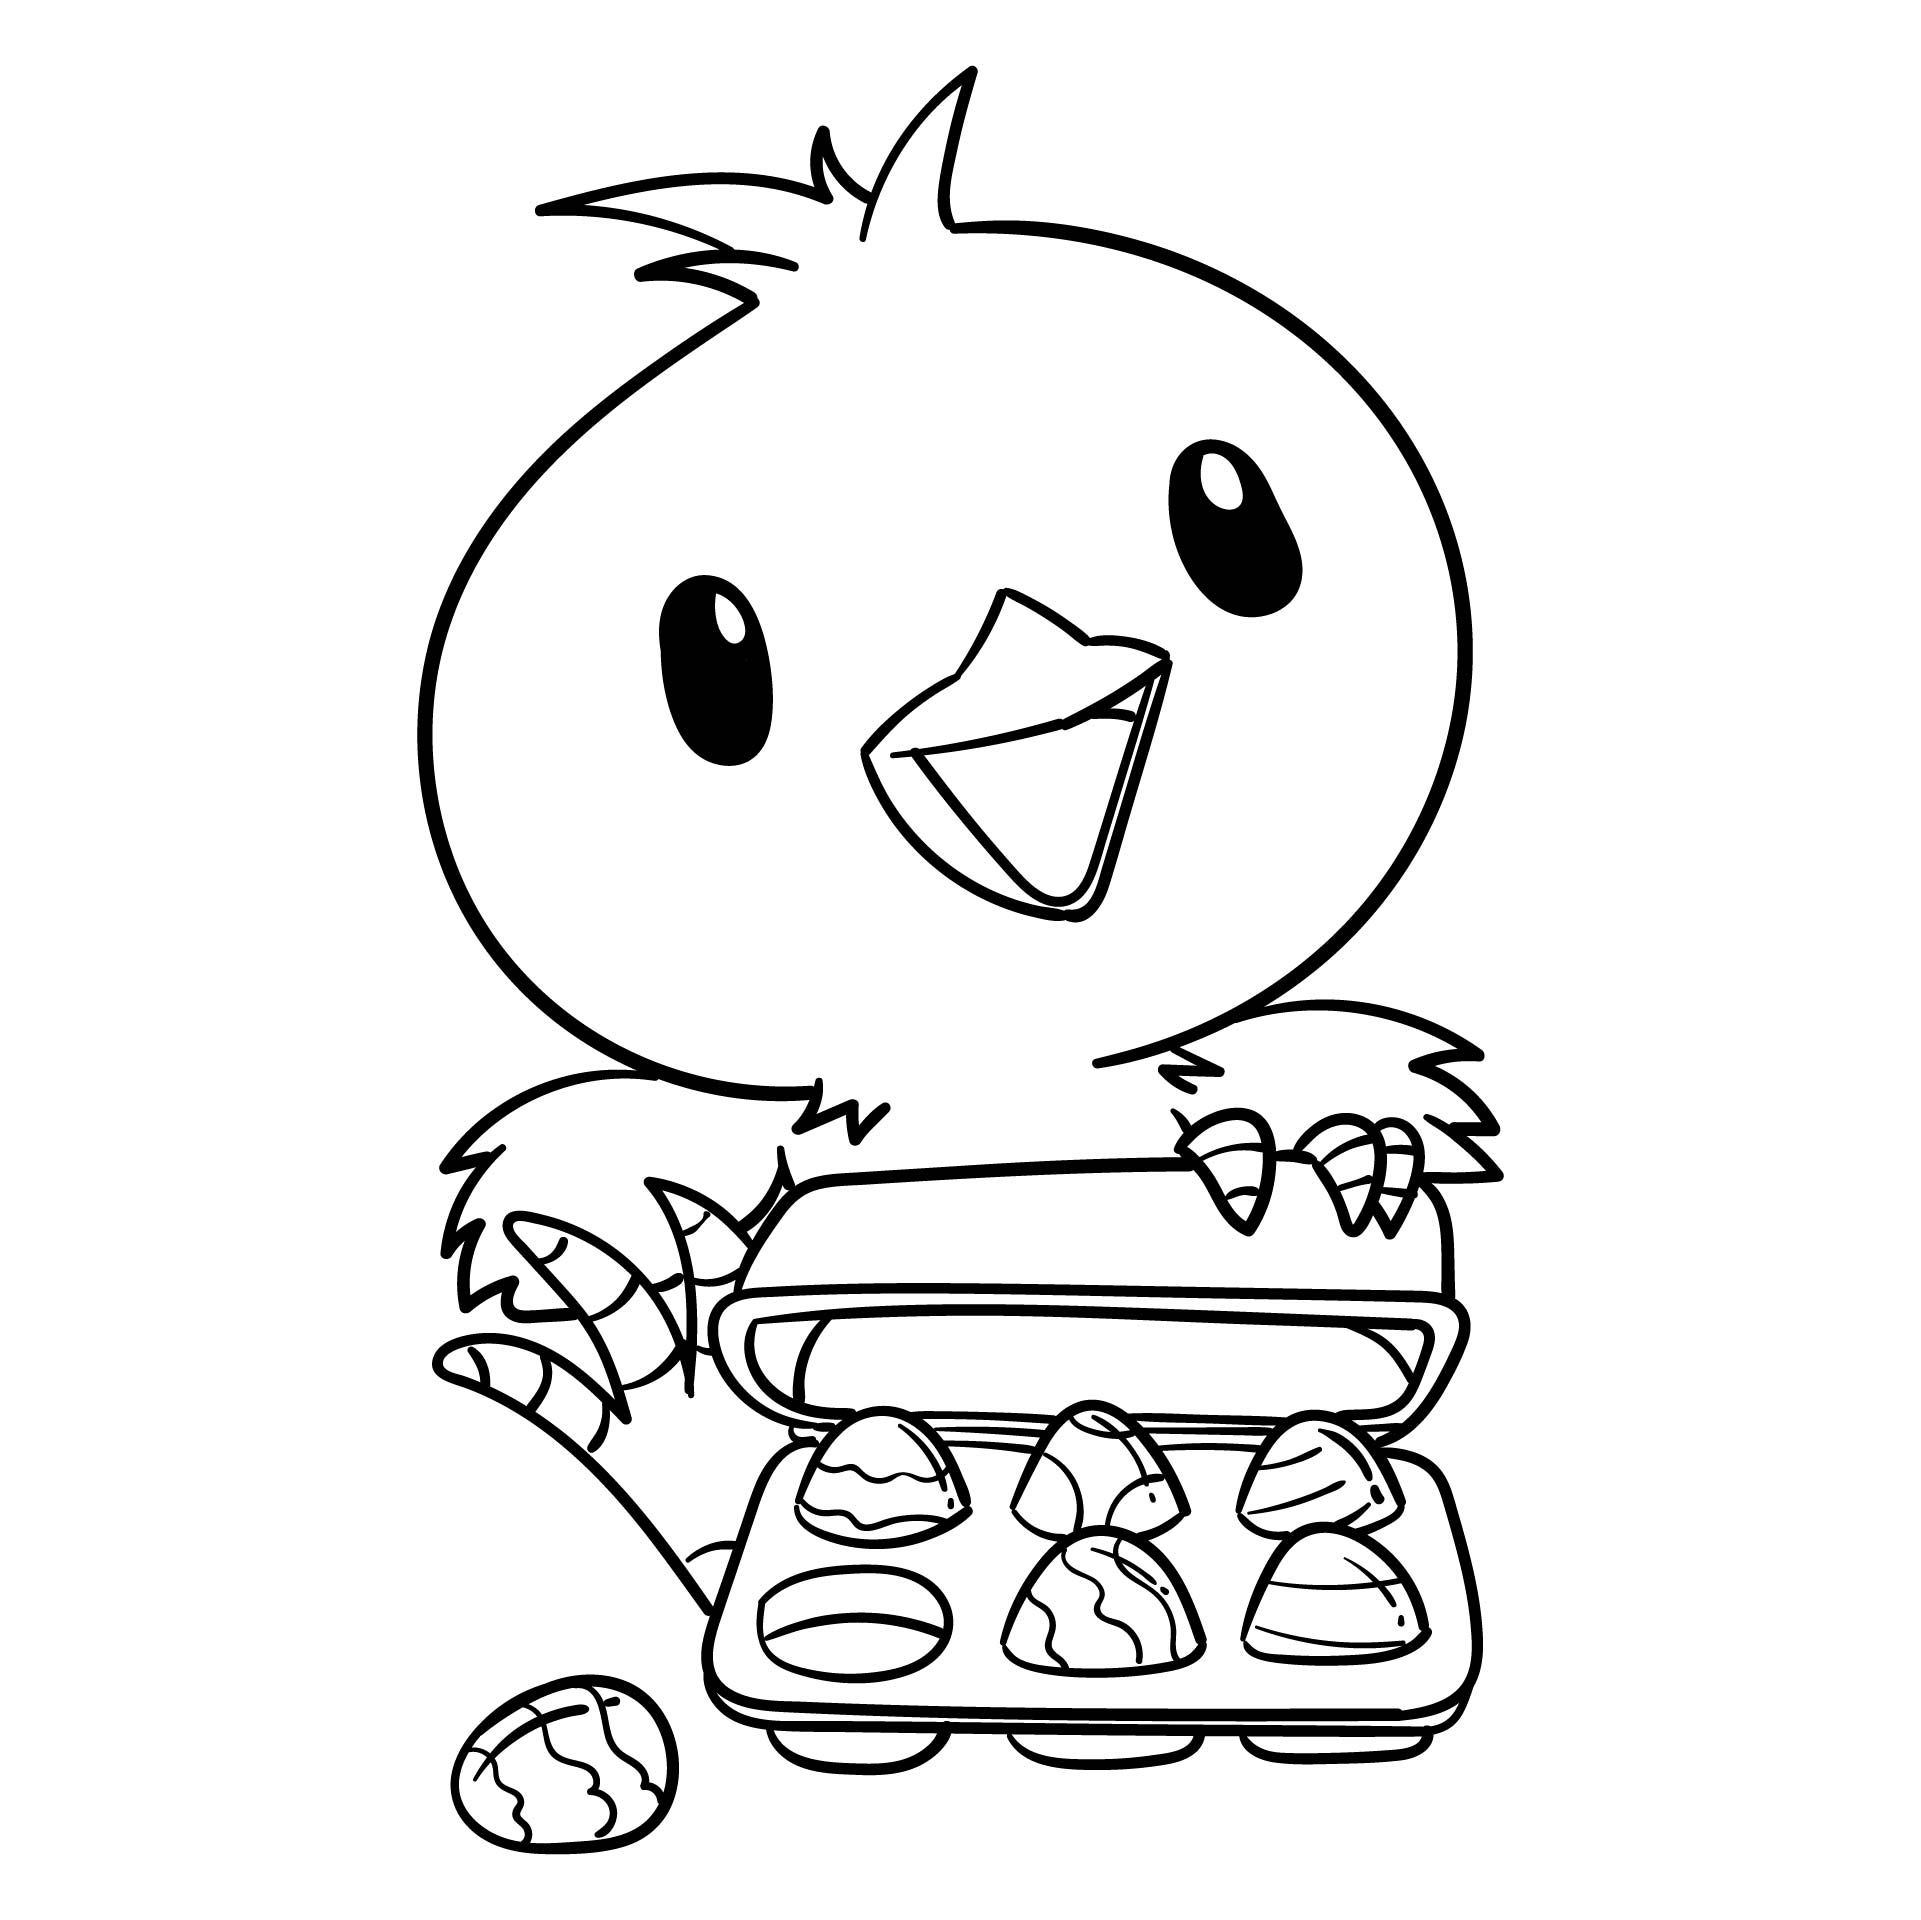 Chicken And Small Chocolate Egg Coloring Pages